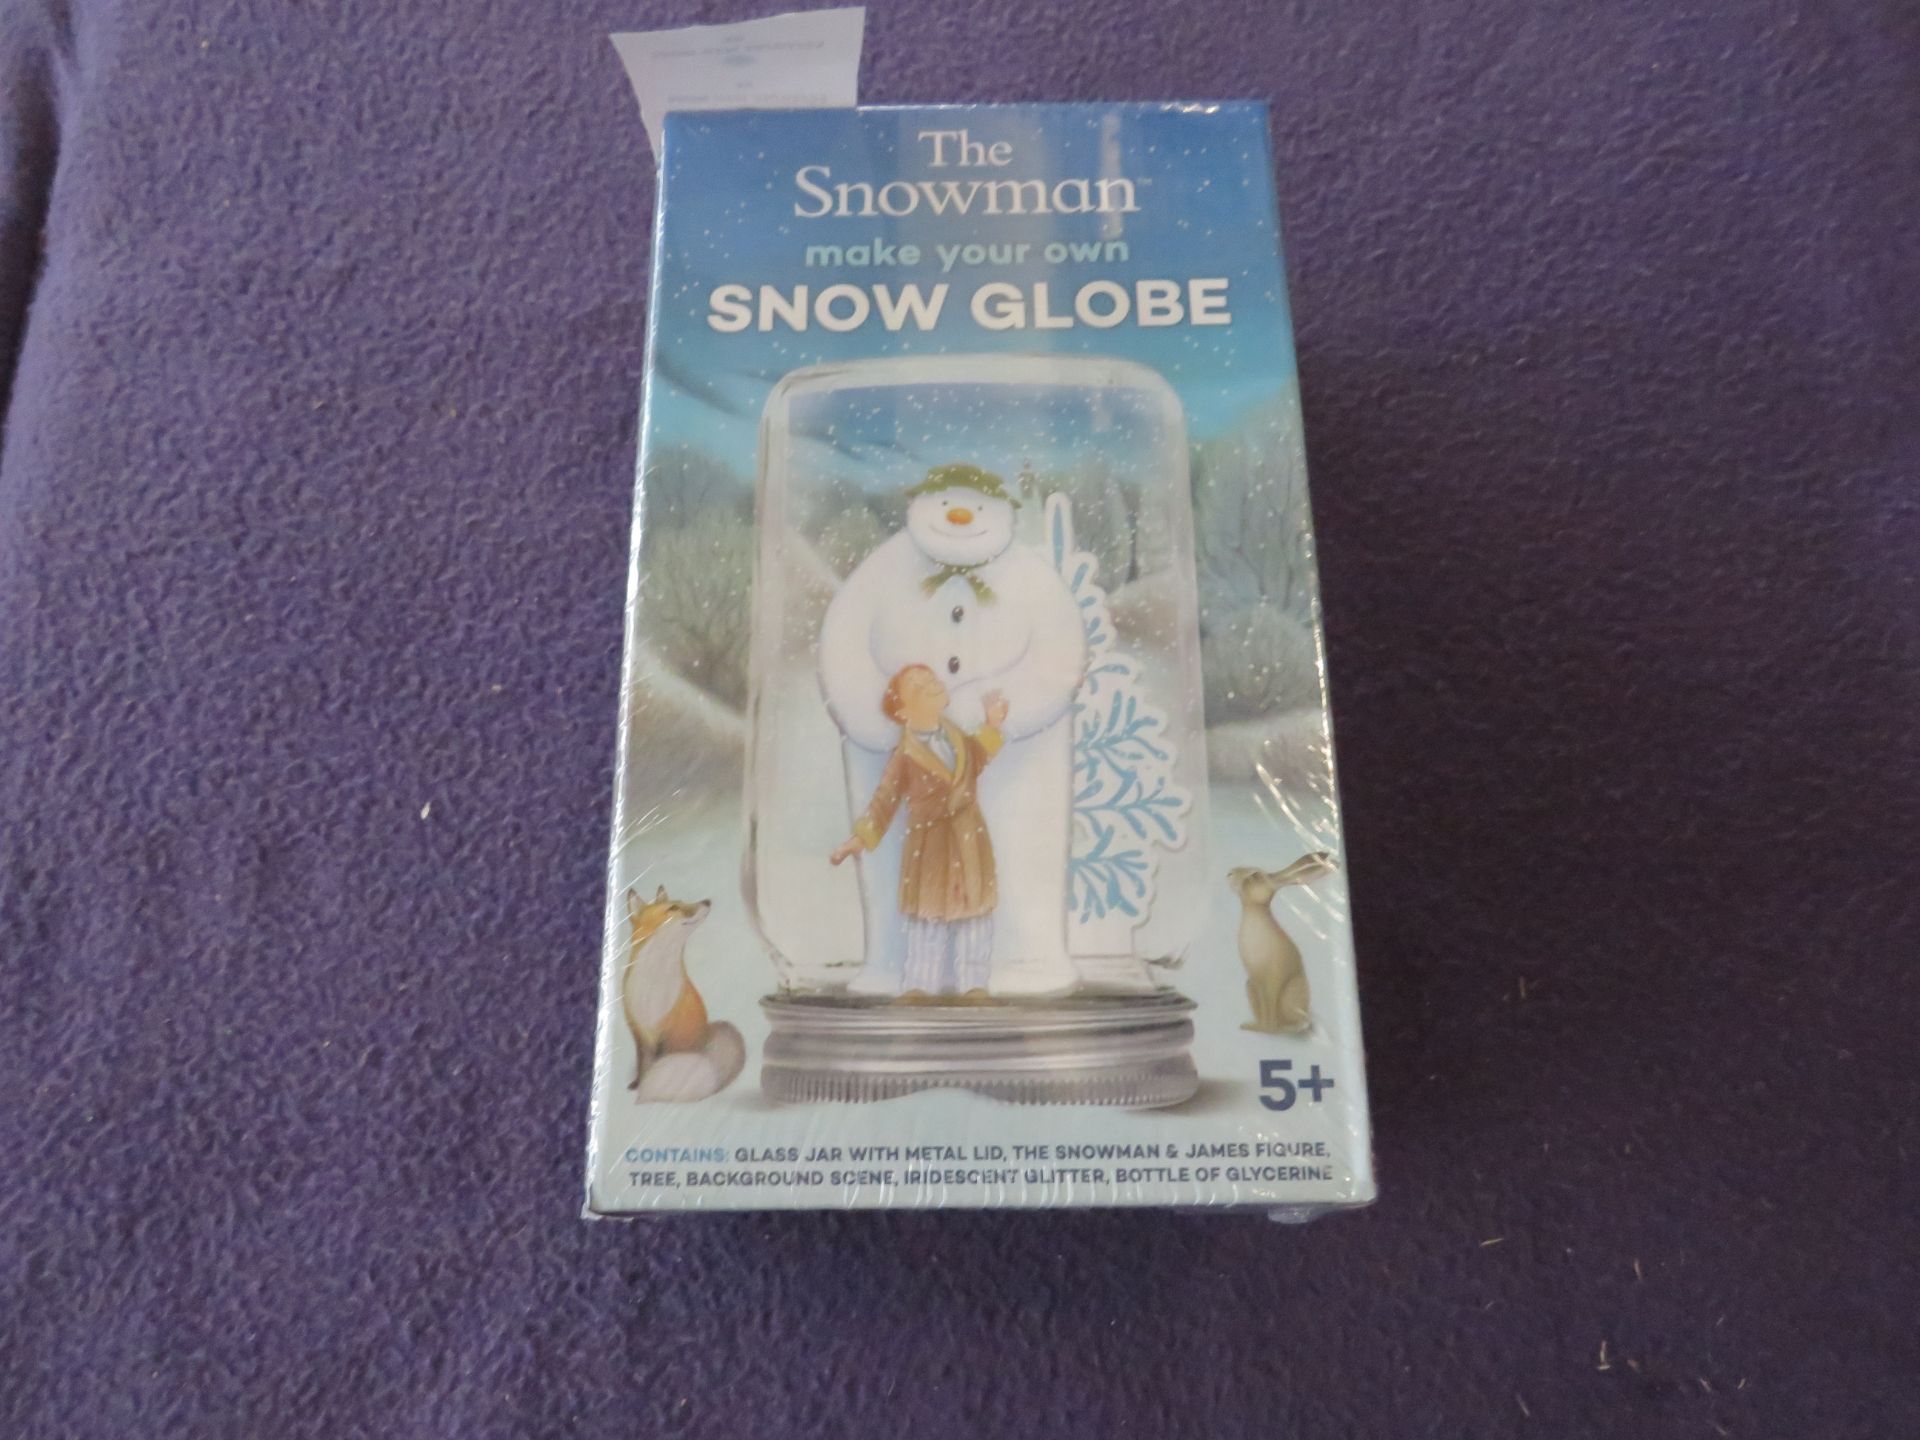 5x The Snowman - Make Your Own Snowglobe - New & Boxed.